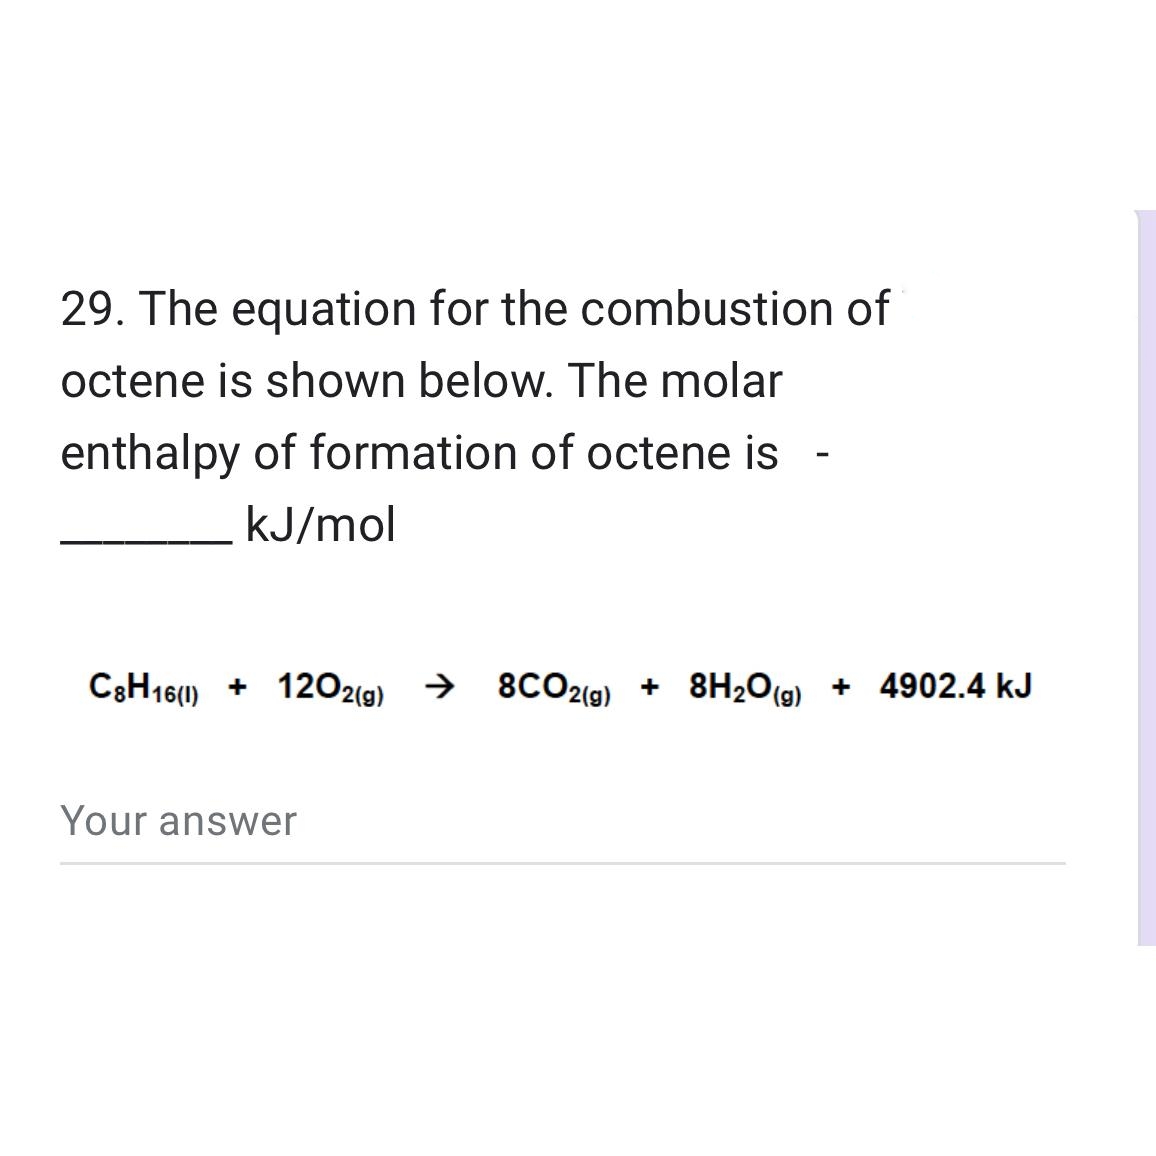 29. The equation for the combustion of
octene is shown below. The molar
enthalpy of formation of octene is
kJ/mol
C8H16(1) 1202(g) → 8CO2(g) + 8H₂O(g) +
+
+ 8H₂O(g) + 4902.4 kJ
Your answer